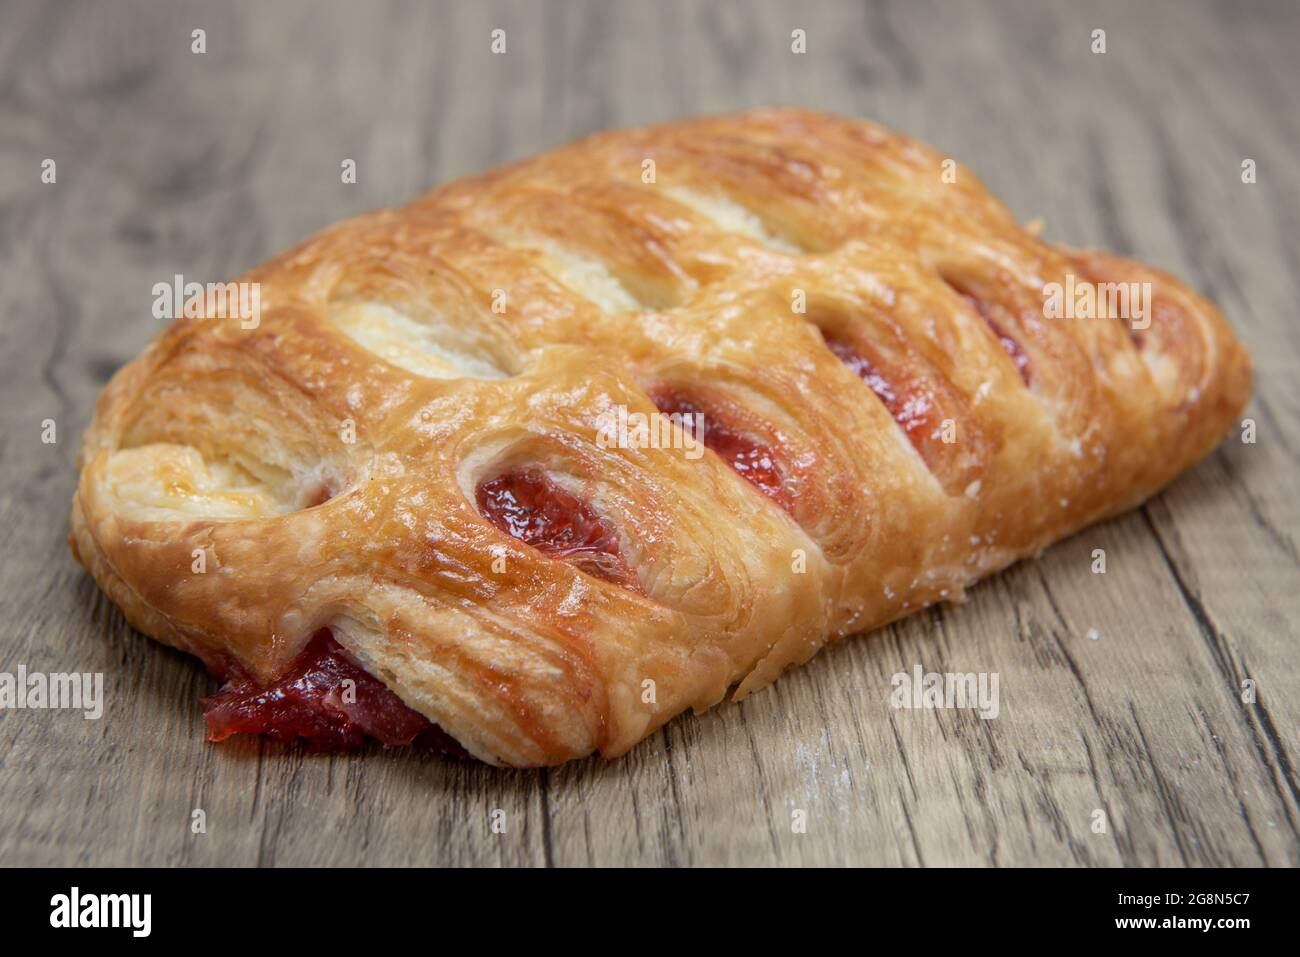 Ham and cheese croissant sandwich is textured with flakey crust for a breakfast treat delight. Stock Photo